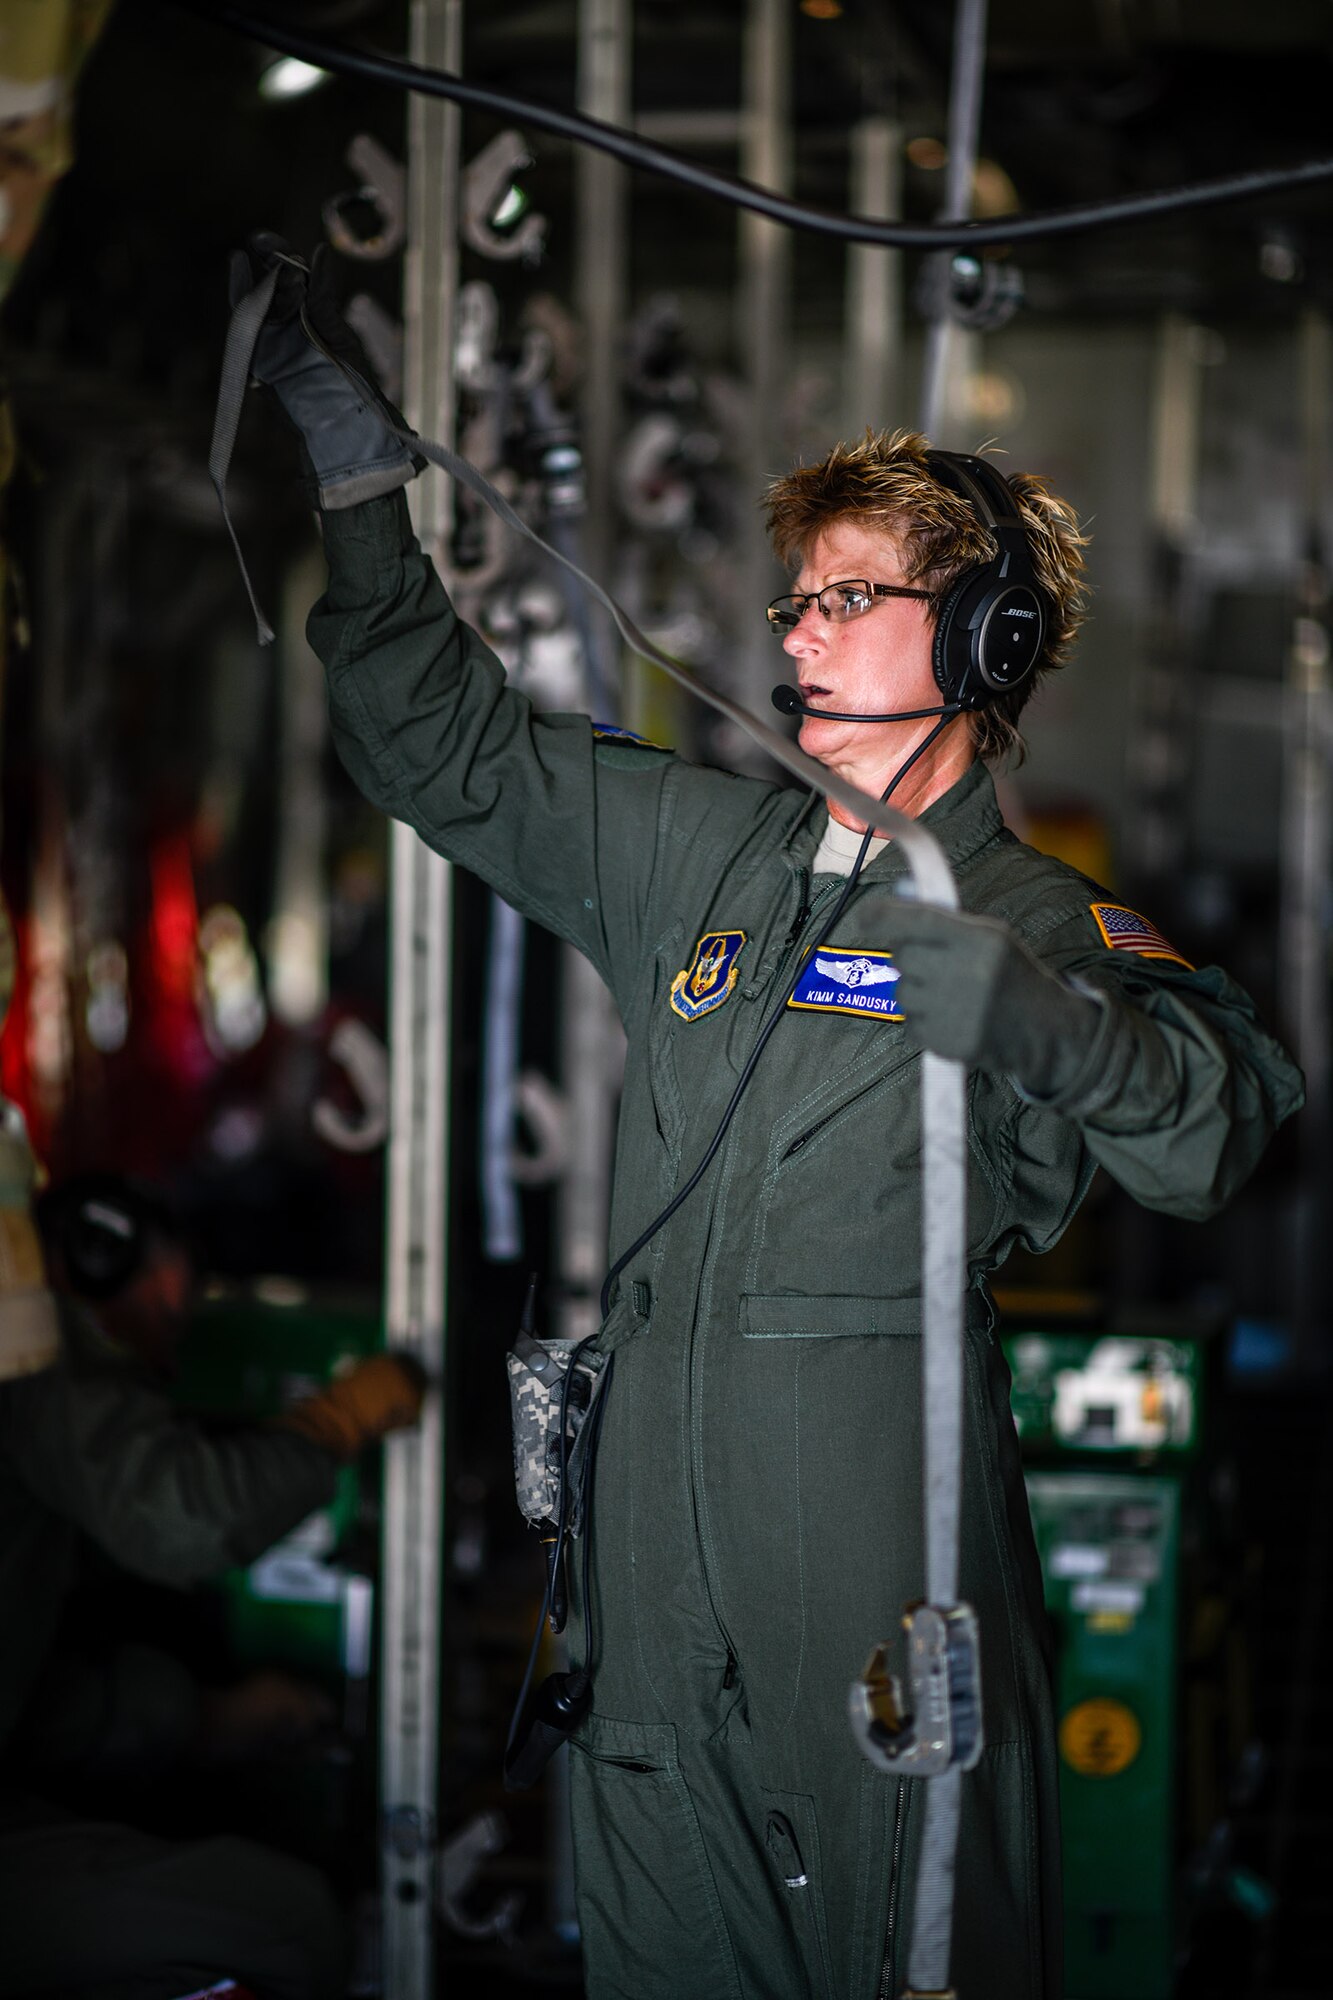 U.S. Air Force Lt. Col. Kimm Sandusky, a reserve Airman with the 445th Aeromedical Evacuation Squadron, extends cargo straps aboard a Youngstown Air Reserve Station C-130H Hercules on the flight line at Wright-Patterson Air Force Base, Ohio, July 10, 2019. YARS personnel flew to Wright-Patterson AFB to assist in an aeromedical evacuation training sortie. (U.S. Air Force photo by Senior Airman Christina Russo)